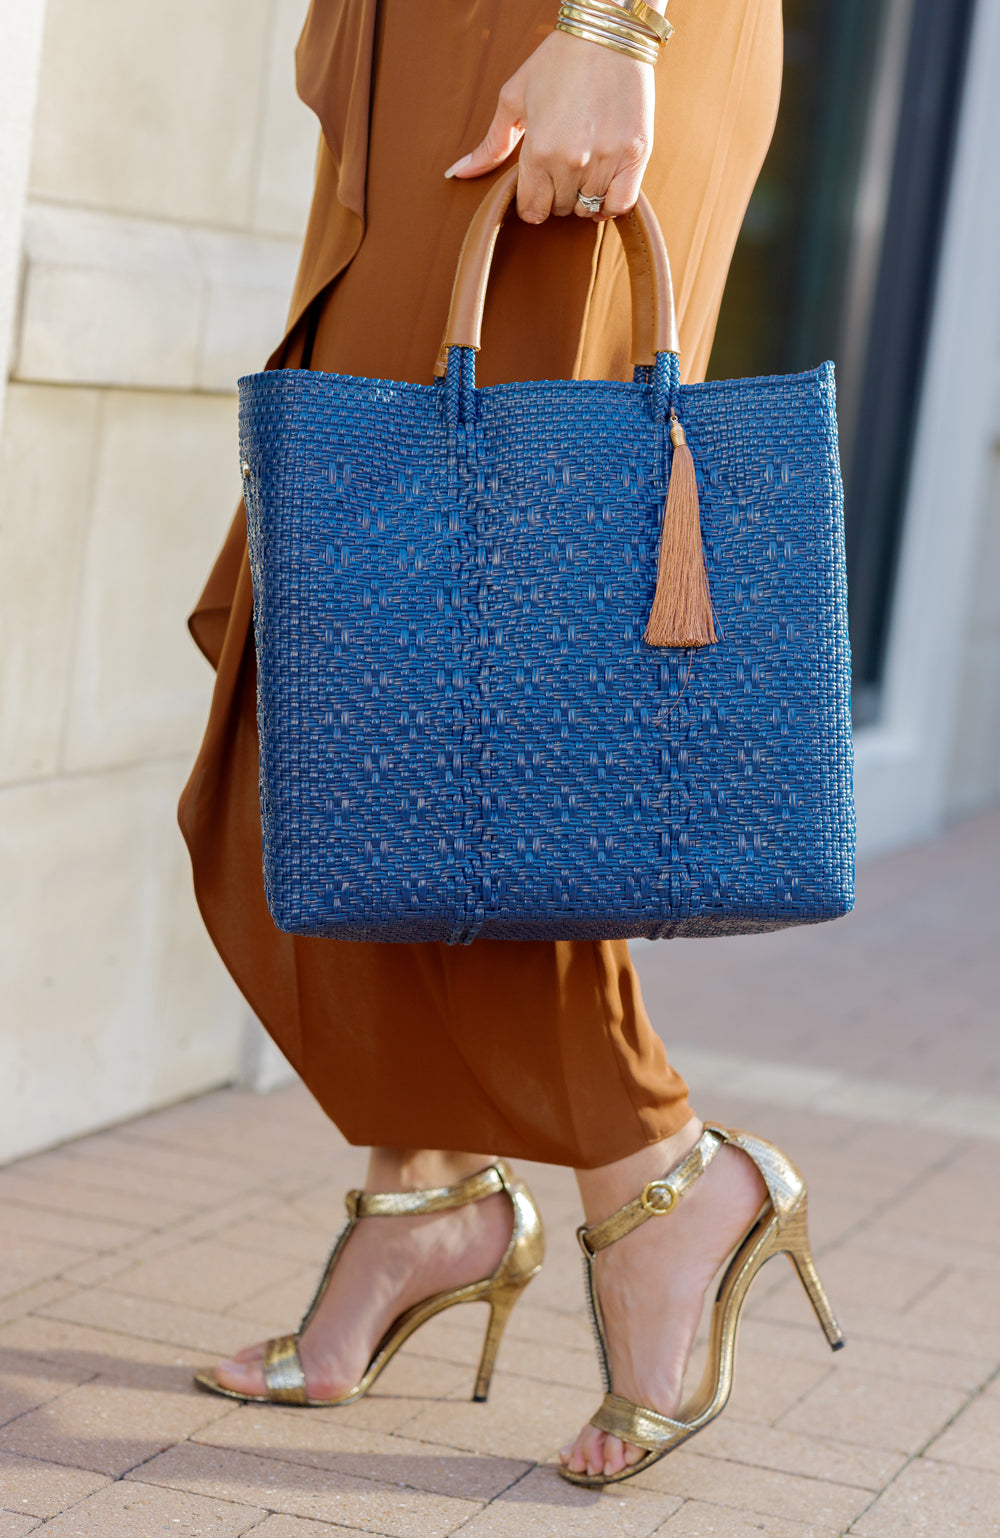 Woman in gold dress with heels holding navy blue woven handbag in city setting